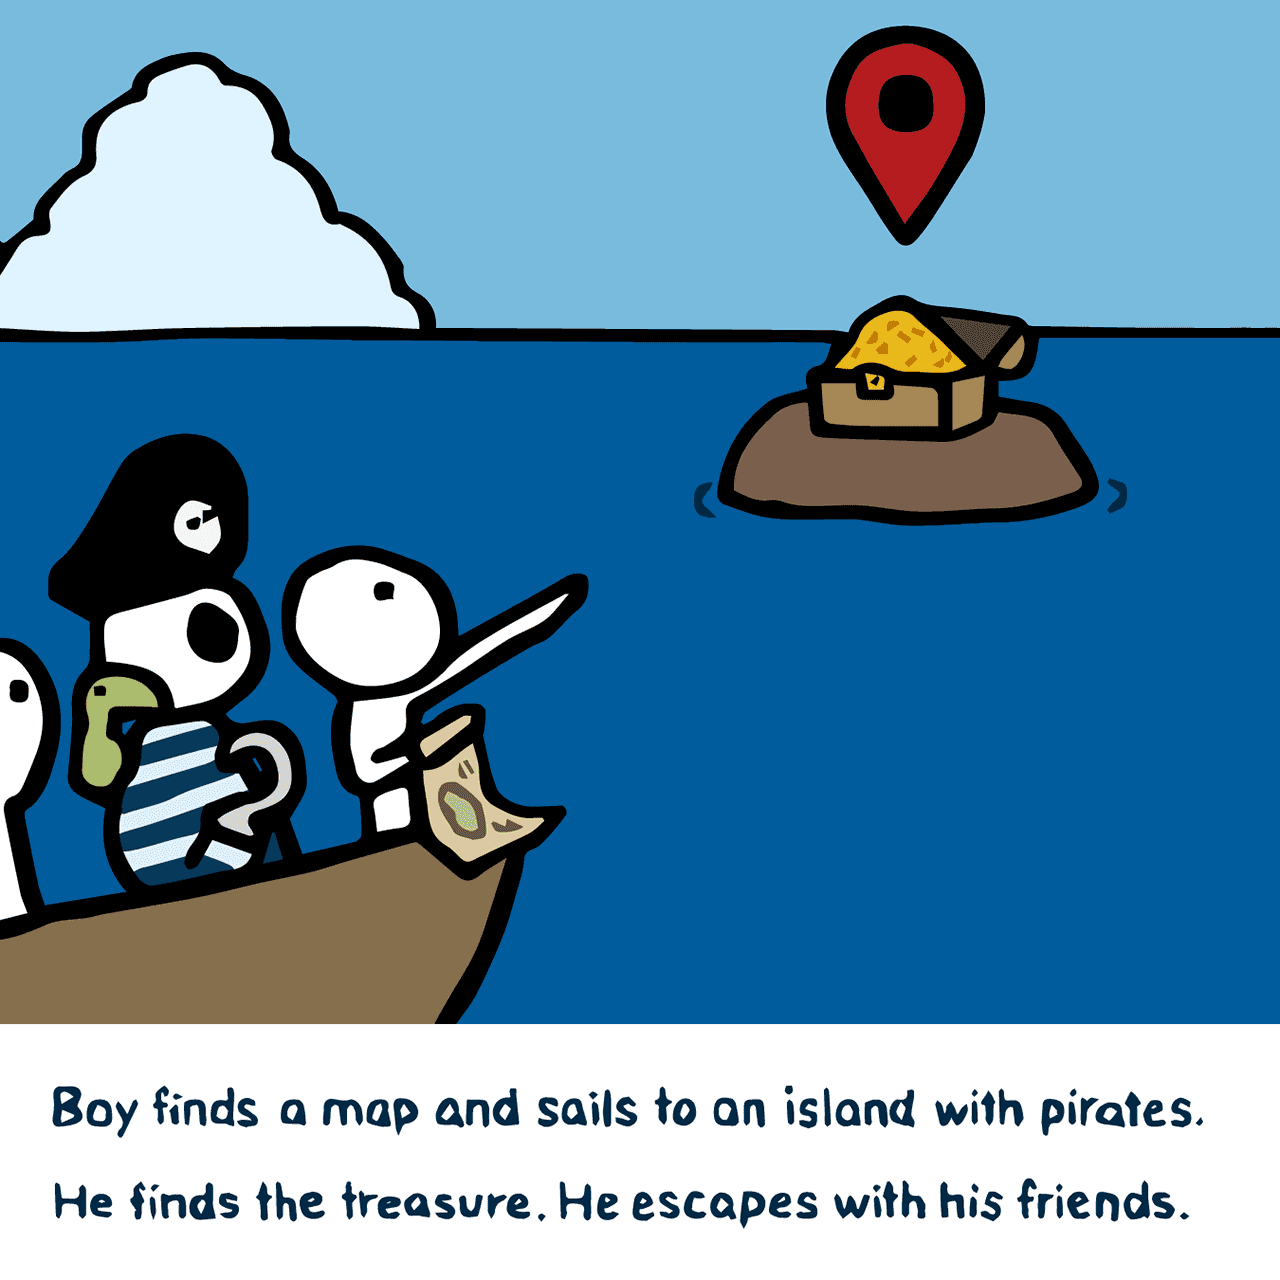 Robert Louis Stevenson  "Treasure Island : Boy finds a map and sails to an island with pirates. He finds the treasure. He escapes with his friends."